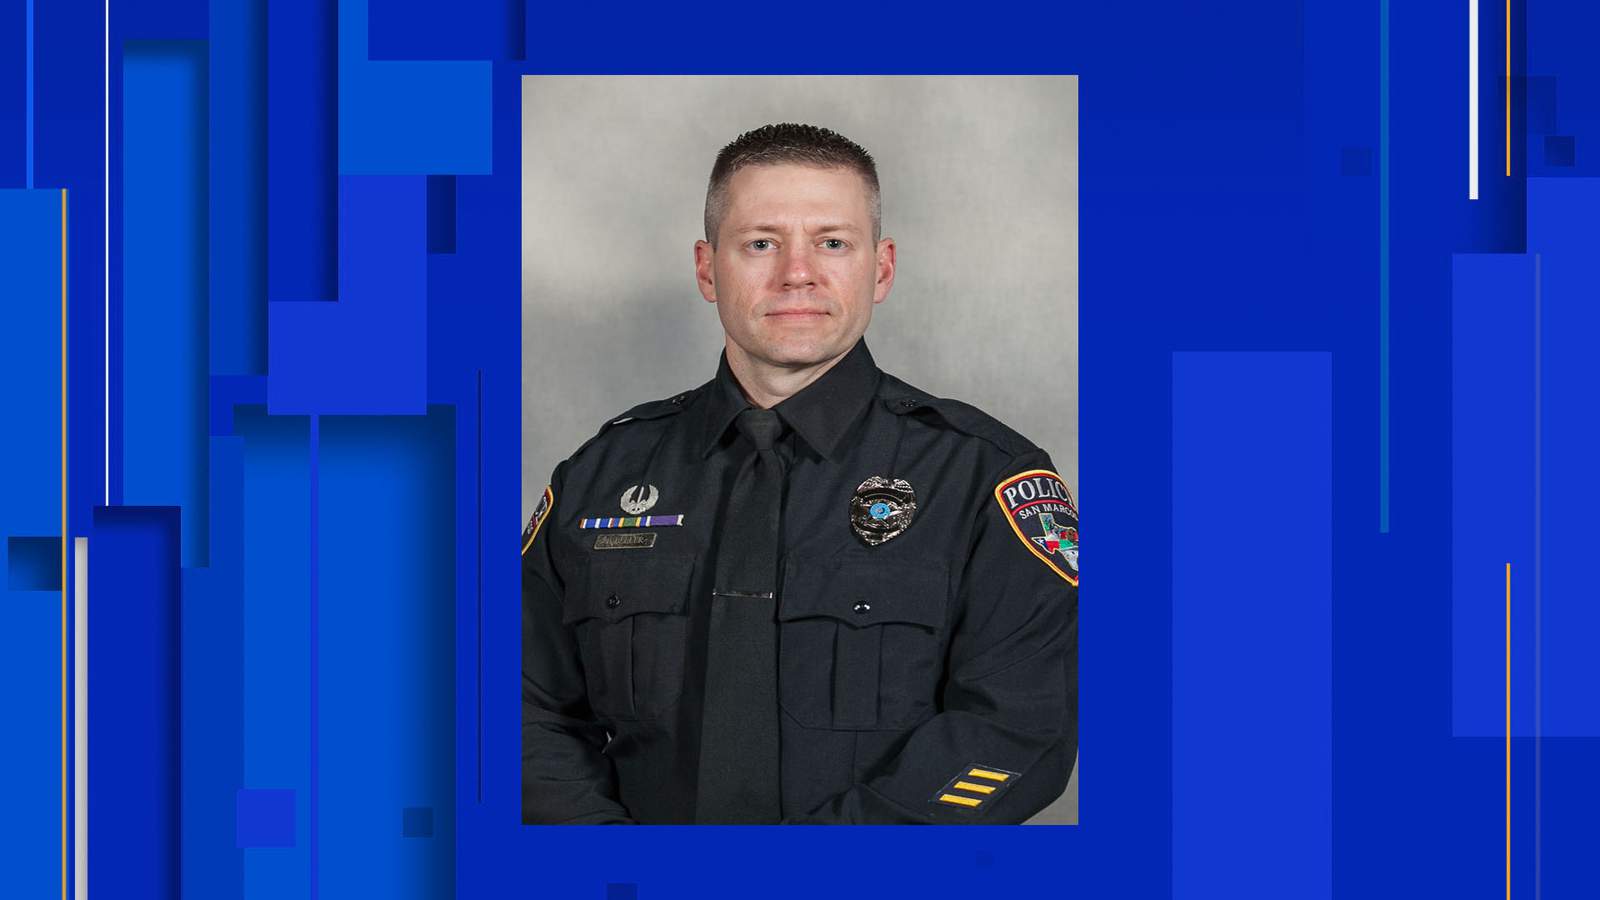 San Marcos police officer recovering after being struck by vehicle on highway, officials say